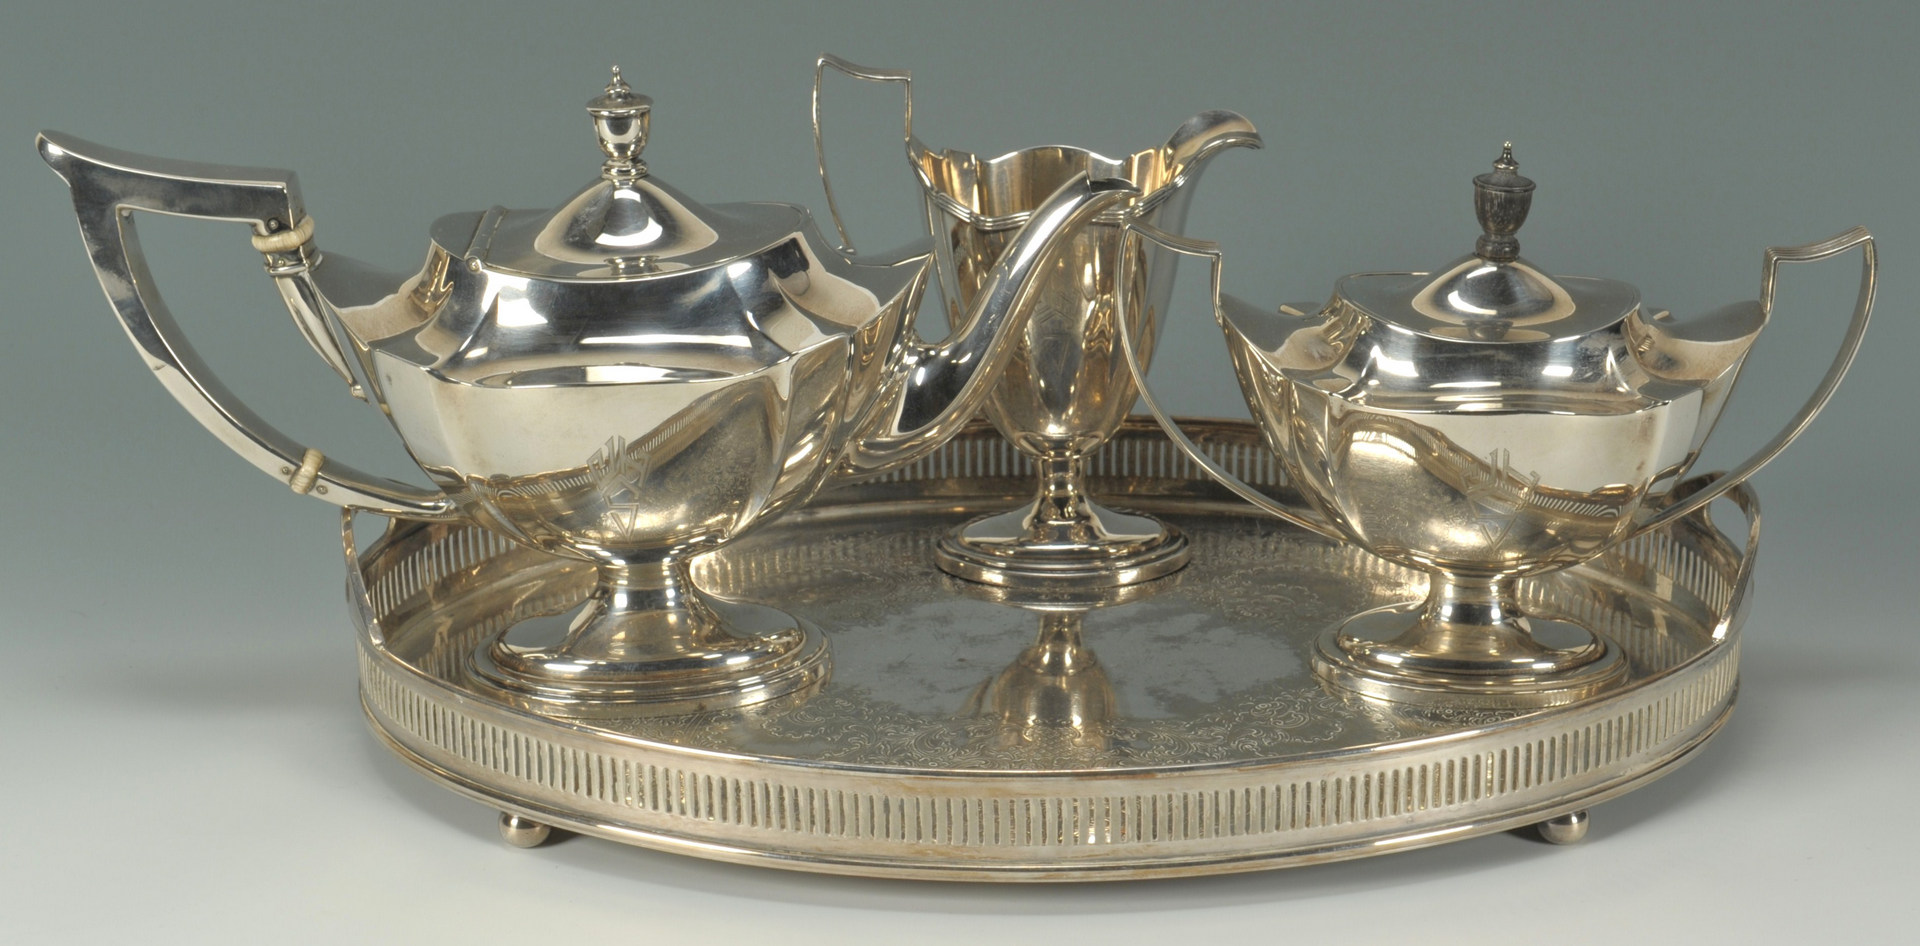 Lot 59: Gorham Plymouth Sterling Tea Service